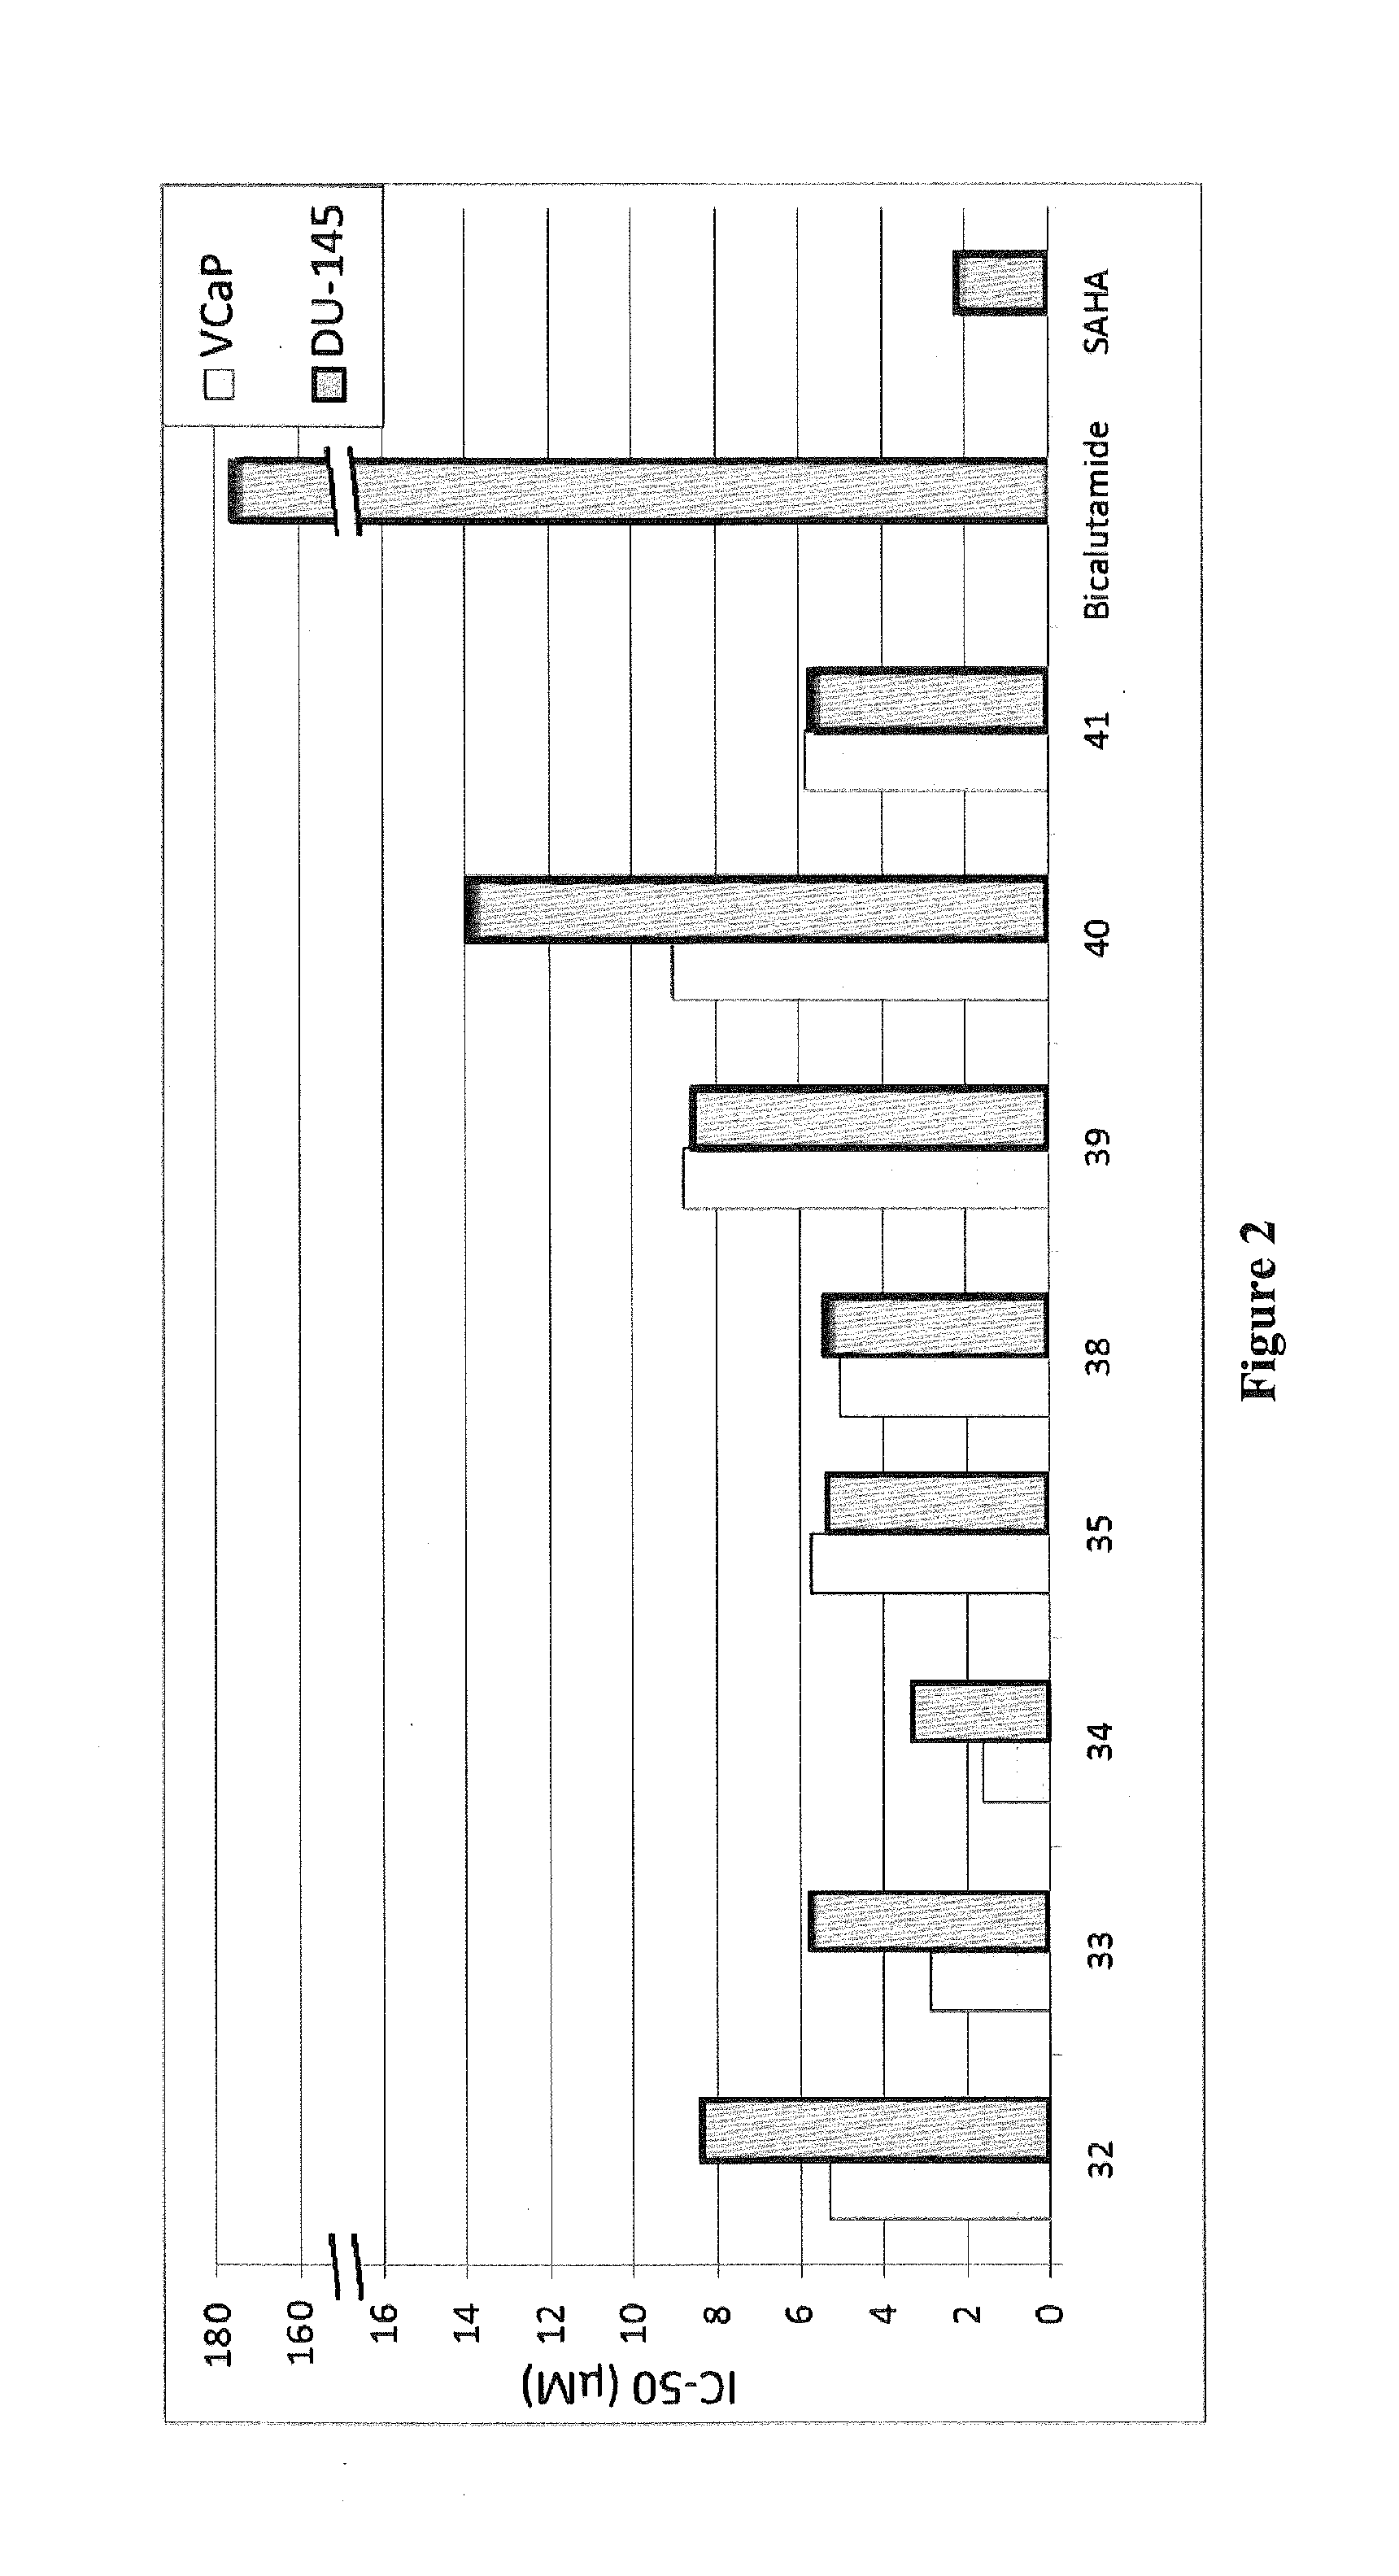 Histone deacetylase (HDAC) inhibitors targeting prostate tumors and methods of making and using thereof